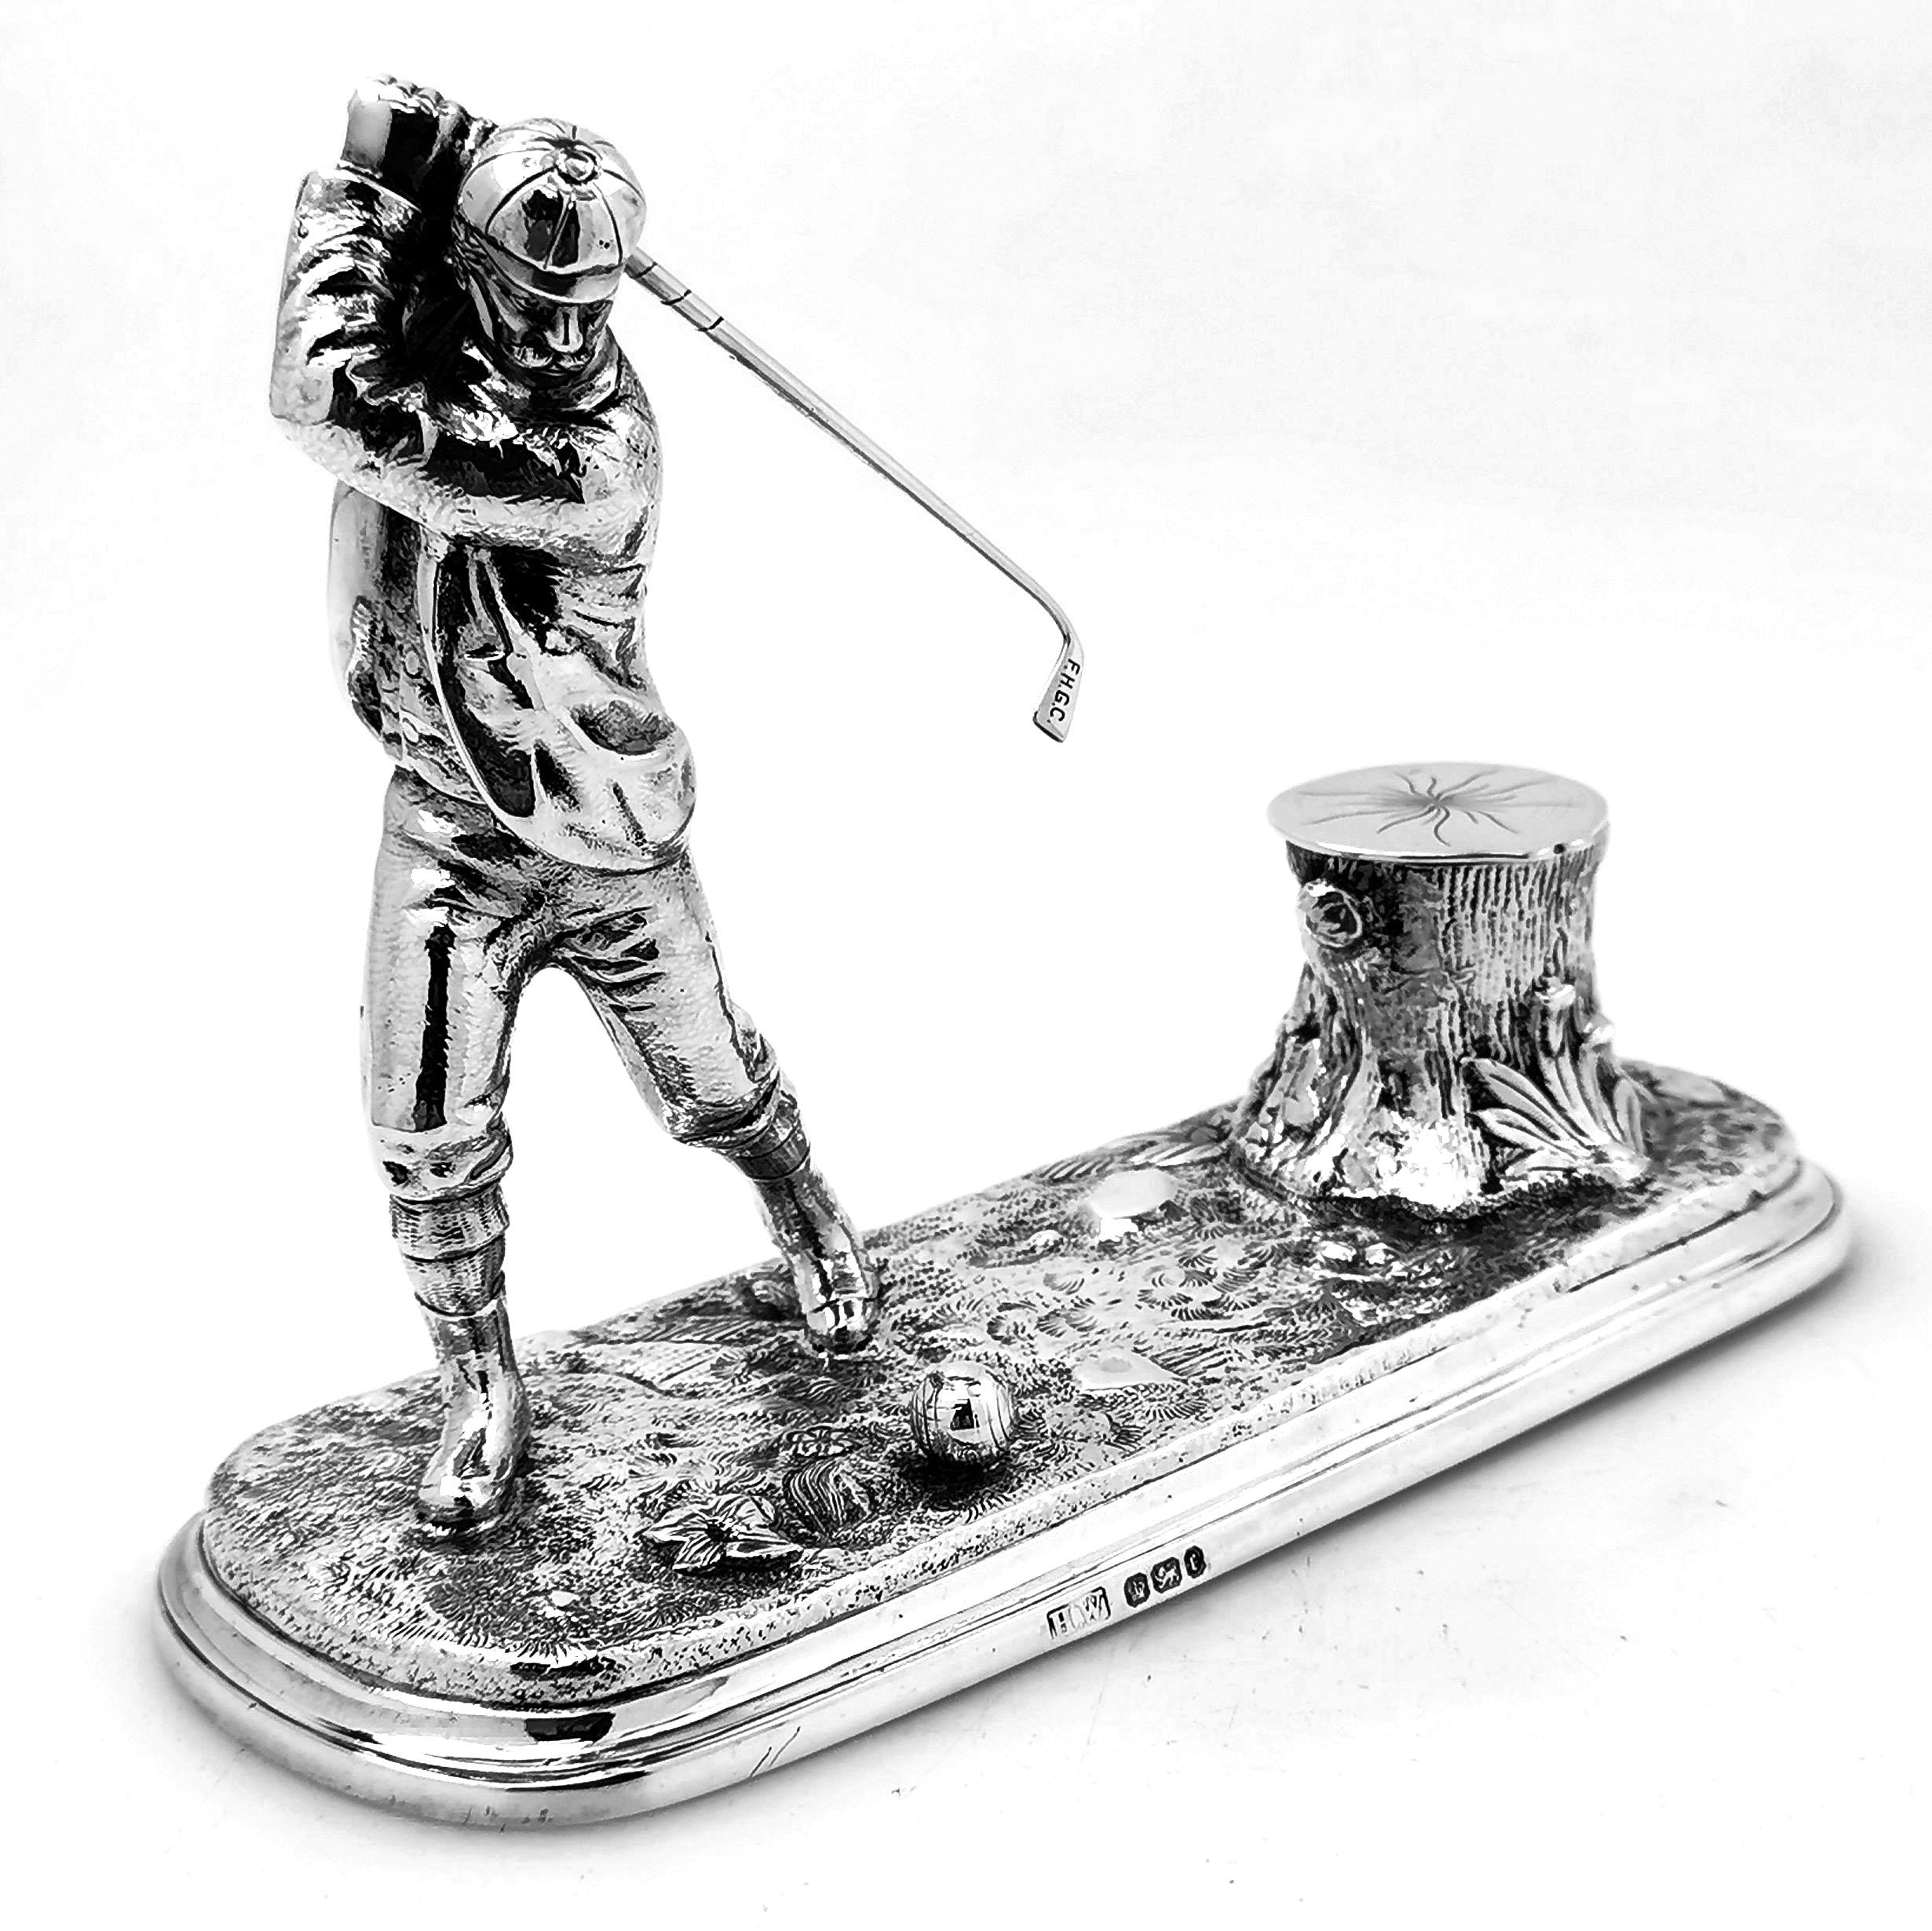 An extremely rare antique Victorian solid silver inkwell or inkstand showing the figure of a golfer swinging his club at a golf ball. The Inkwell is designed to look like a tree stump and has a glass liner. This is a highly collectable and unique